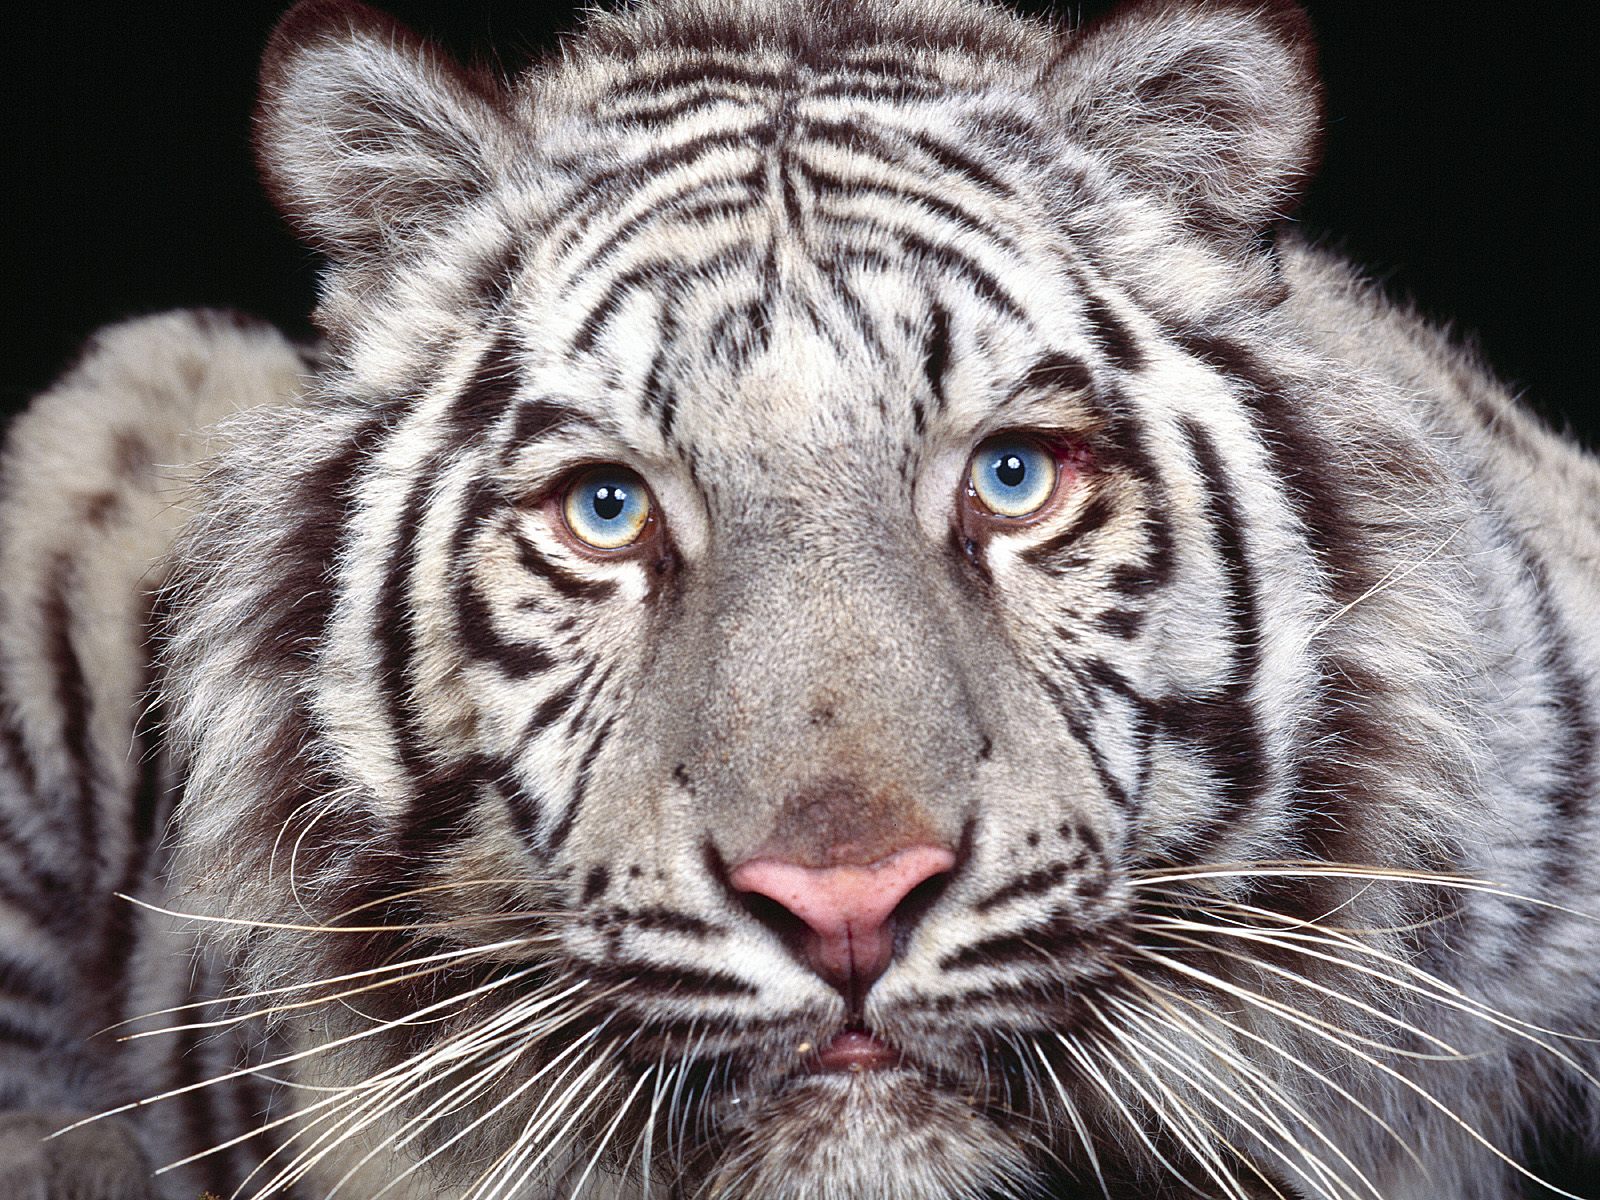 Image Gallary 3 Beautiful White Tiger Wallpapers for Desktop Free